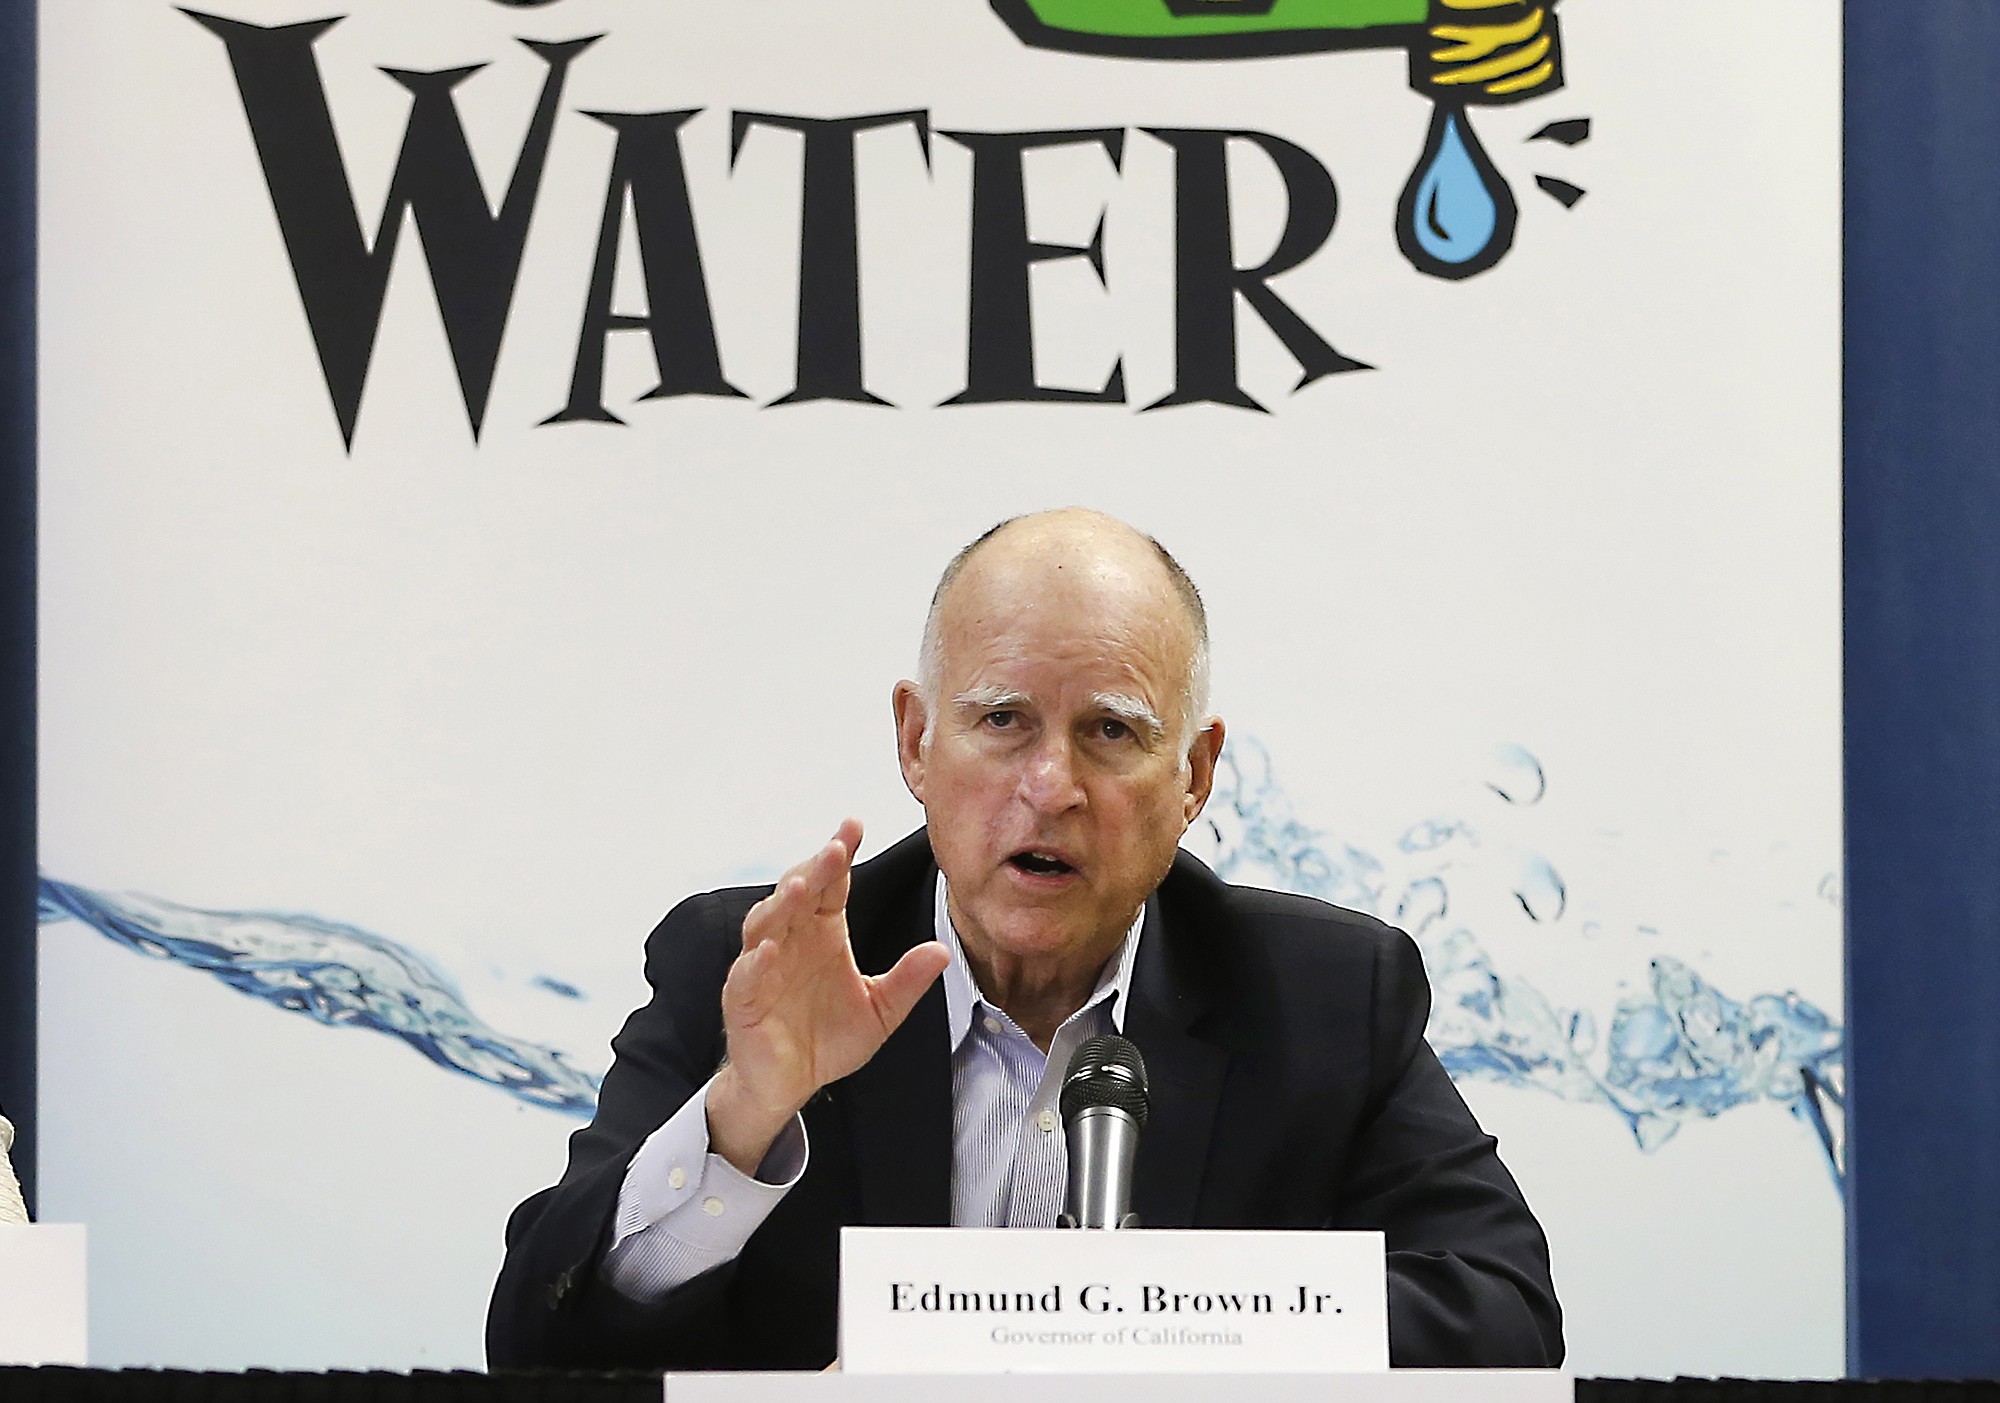 California Gov. Jerry Brown talks with reporters April 16 after a meeting about the drought at his Capitol office in Sacramento, Calif. The State Water Resources Control Board on Tuesday approved sweeping mandatory emergency regulations to protect water supplies as water levels as some of California's lakes and reservoirs continue to decline.